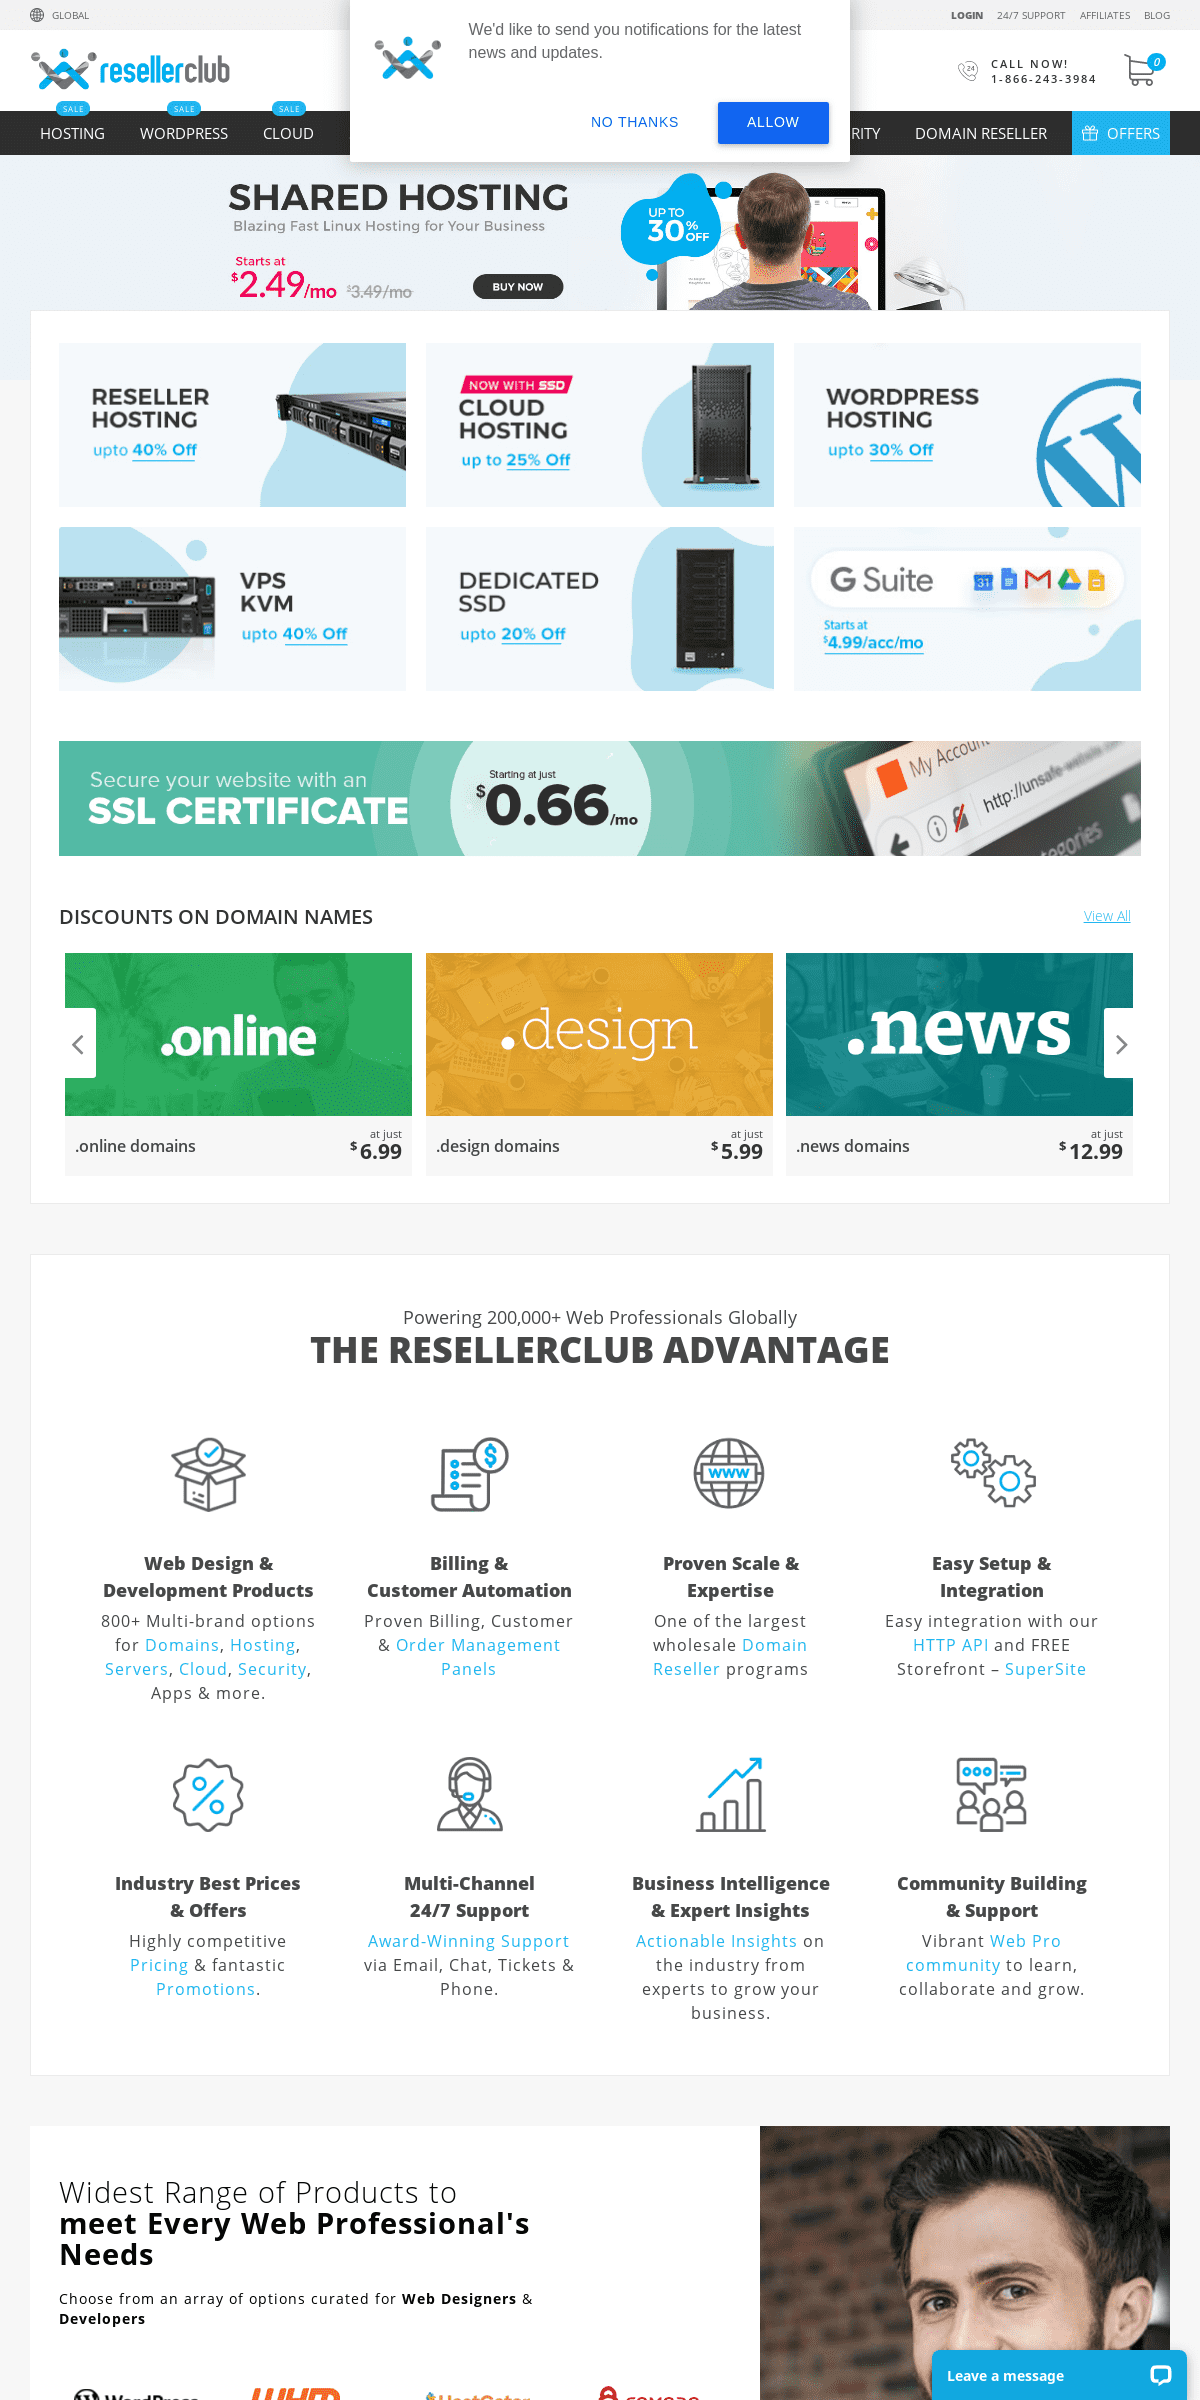 A complete backup of resellerclub.com